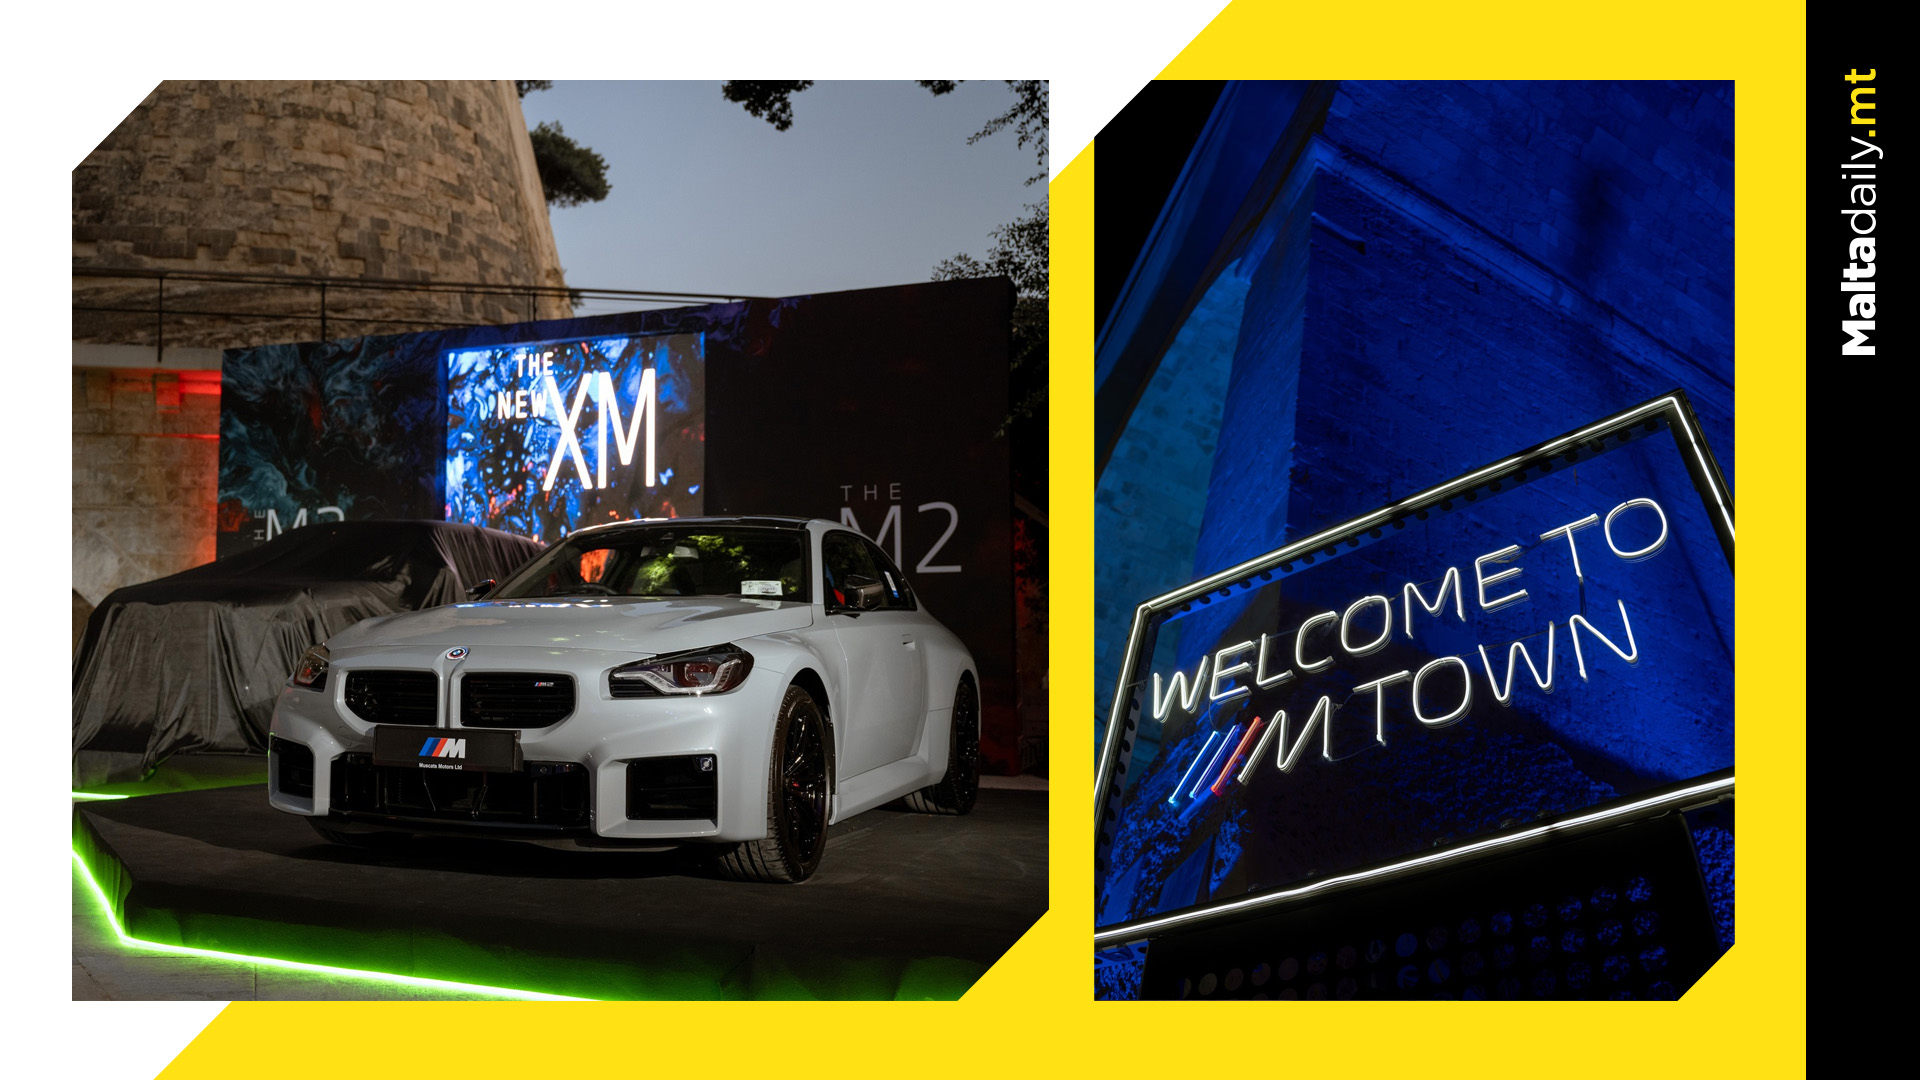 Muscats Motors Presents Exclusive Event Showcasing BMW Luxury Cars and Motorbikes